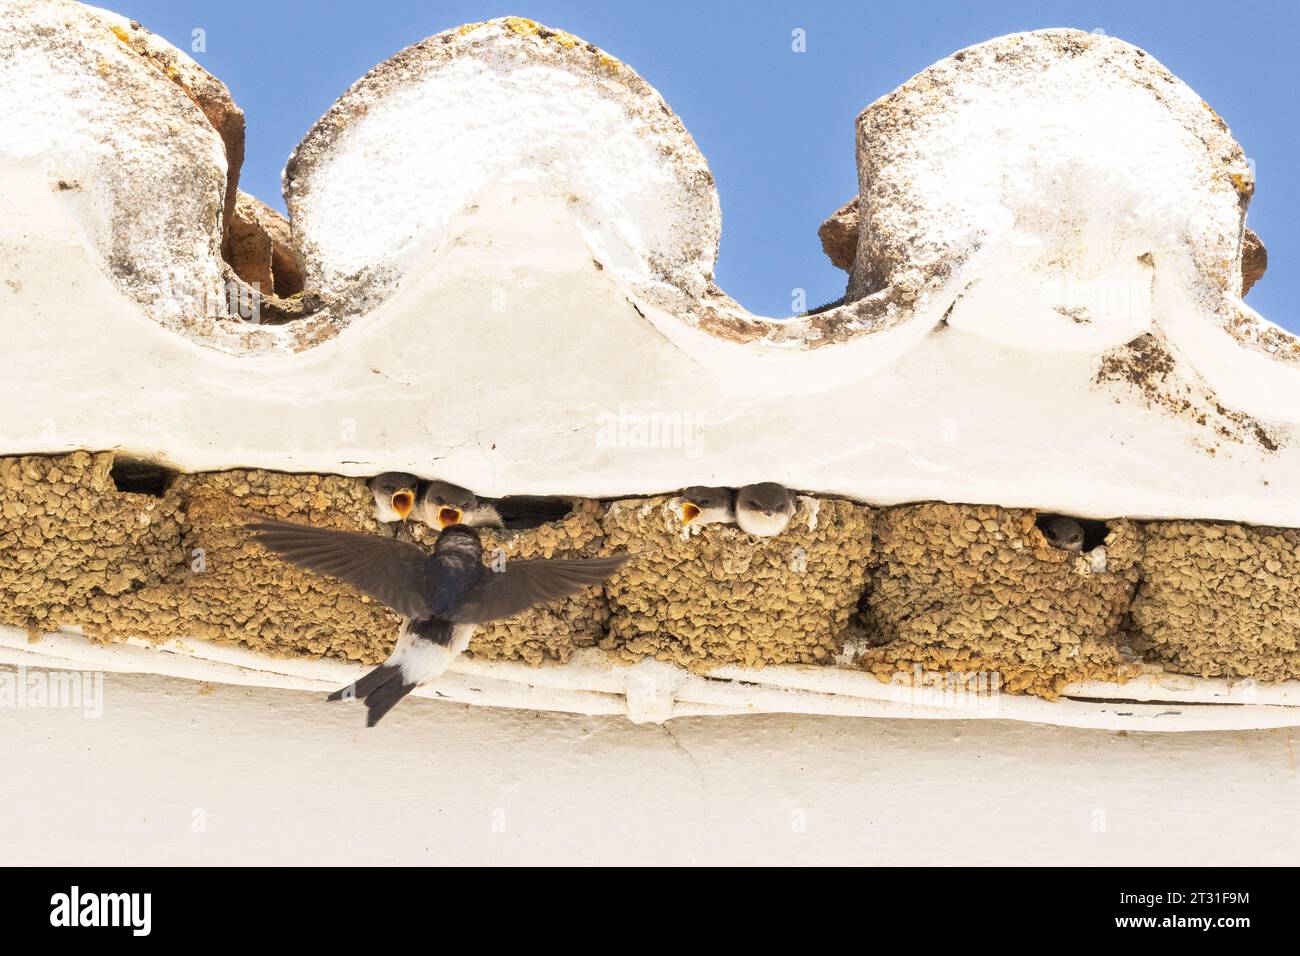 House martins nesting under Spanish house's eaves. People tolerating nature that lives alongside them for mutual benefit. Stock Photo